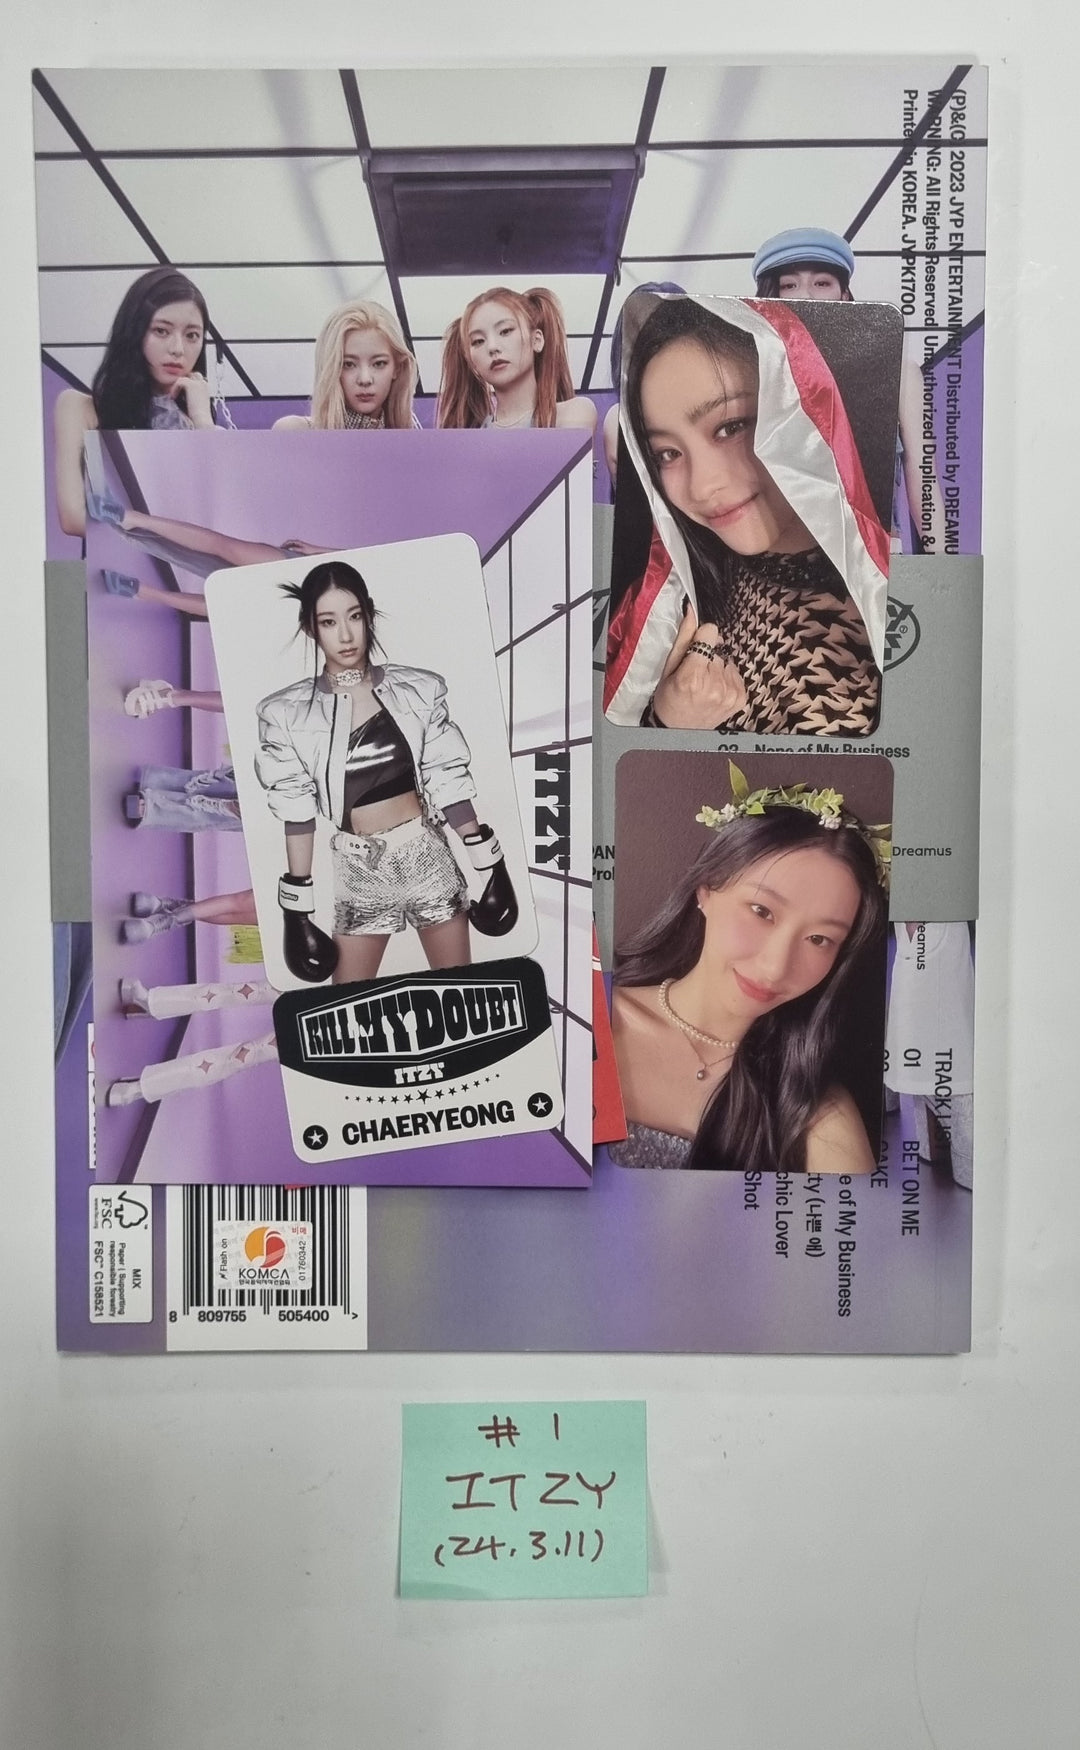 Itzy "Kill My Doubt" - Hand Autographed(Signed) Promo Album [24.3.11]